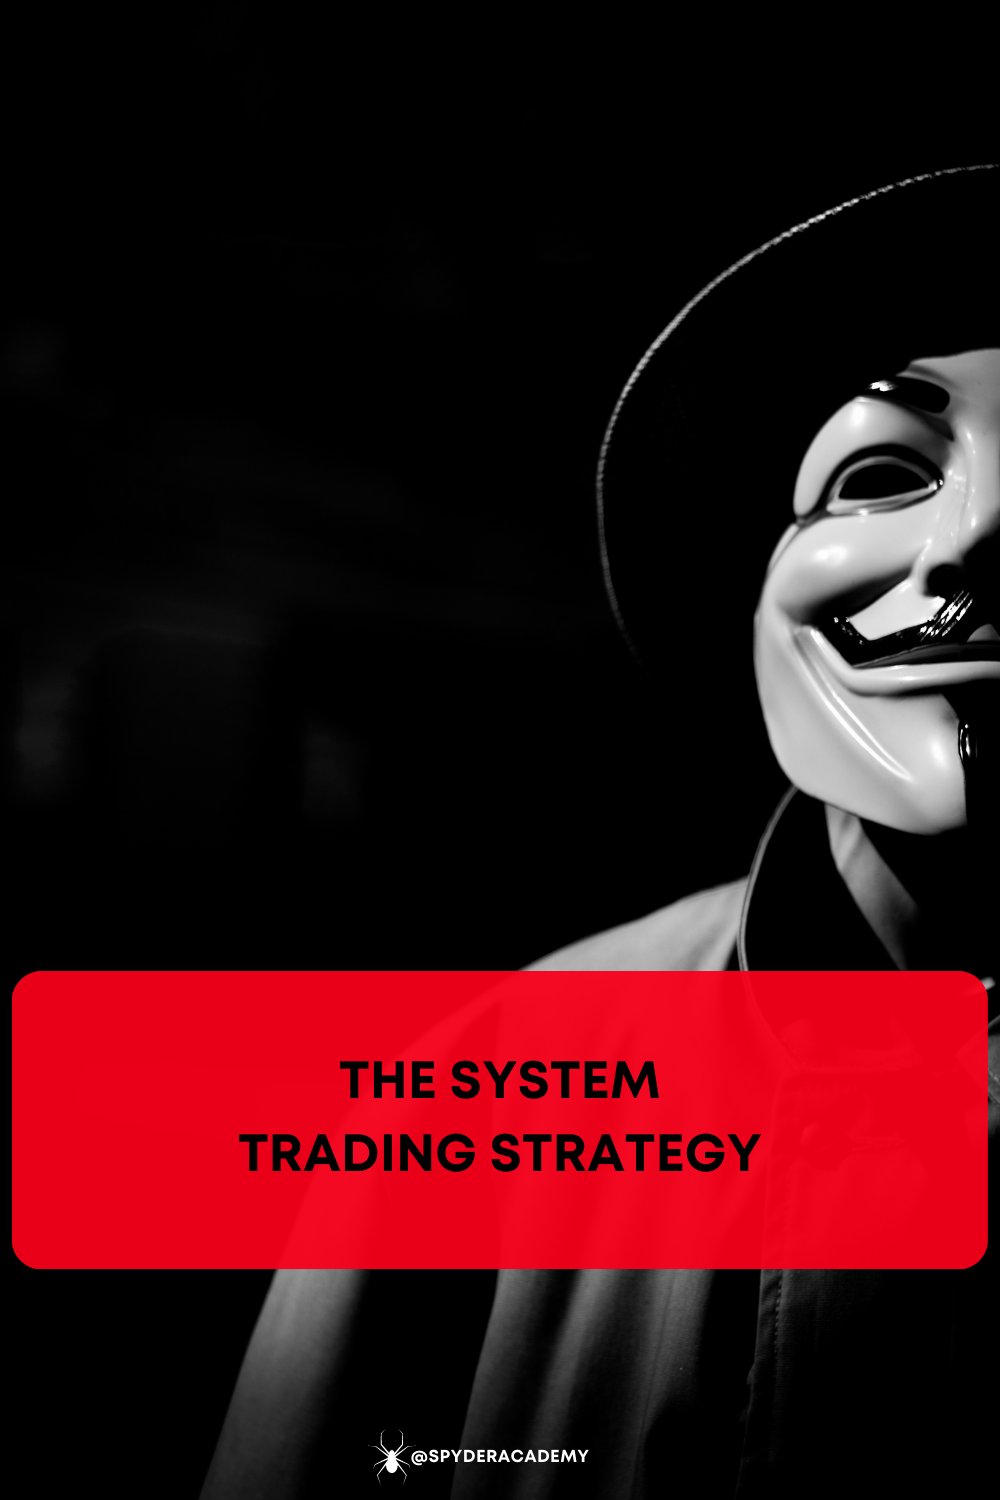 Learn how to trade The System strategy using the 10/50 SMA Moving Average Crossover, and improve your win rate by knowing the market direction!